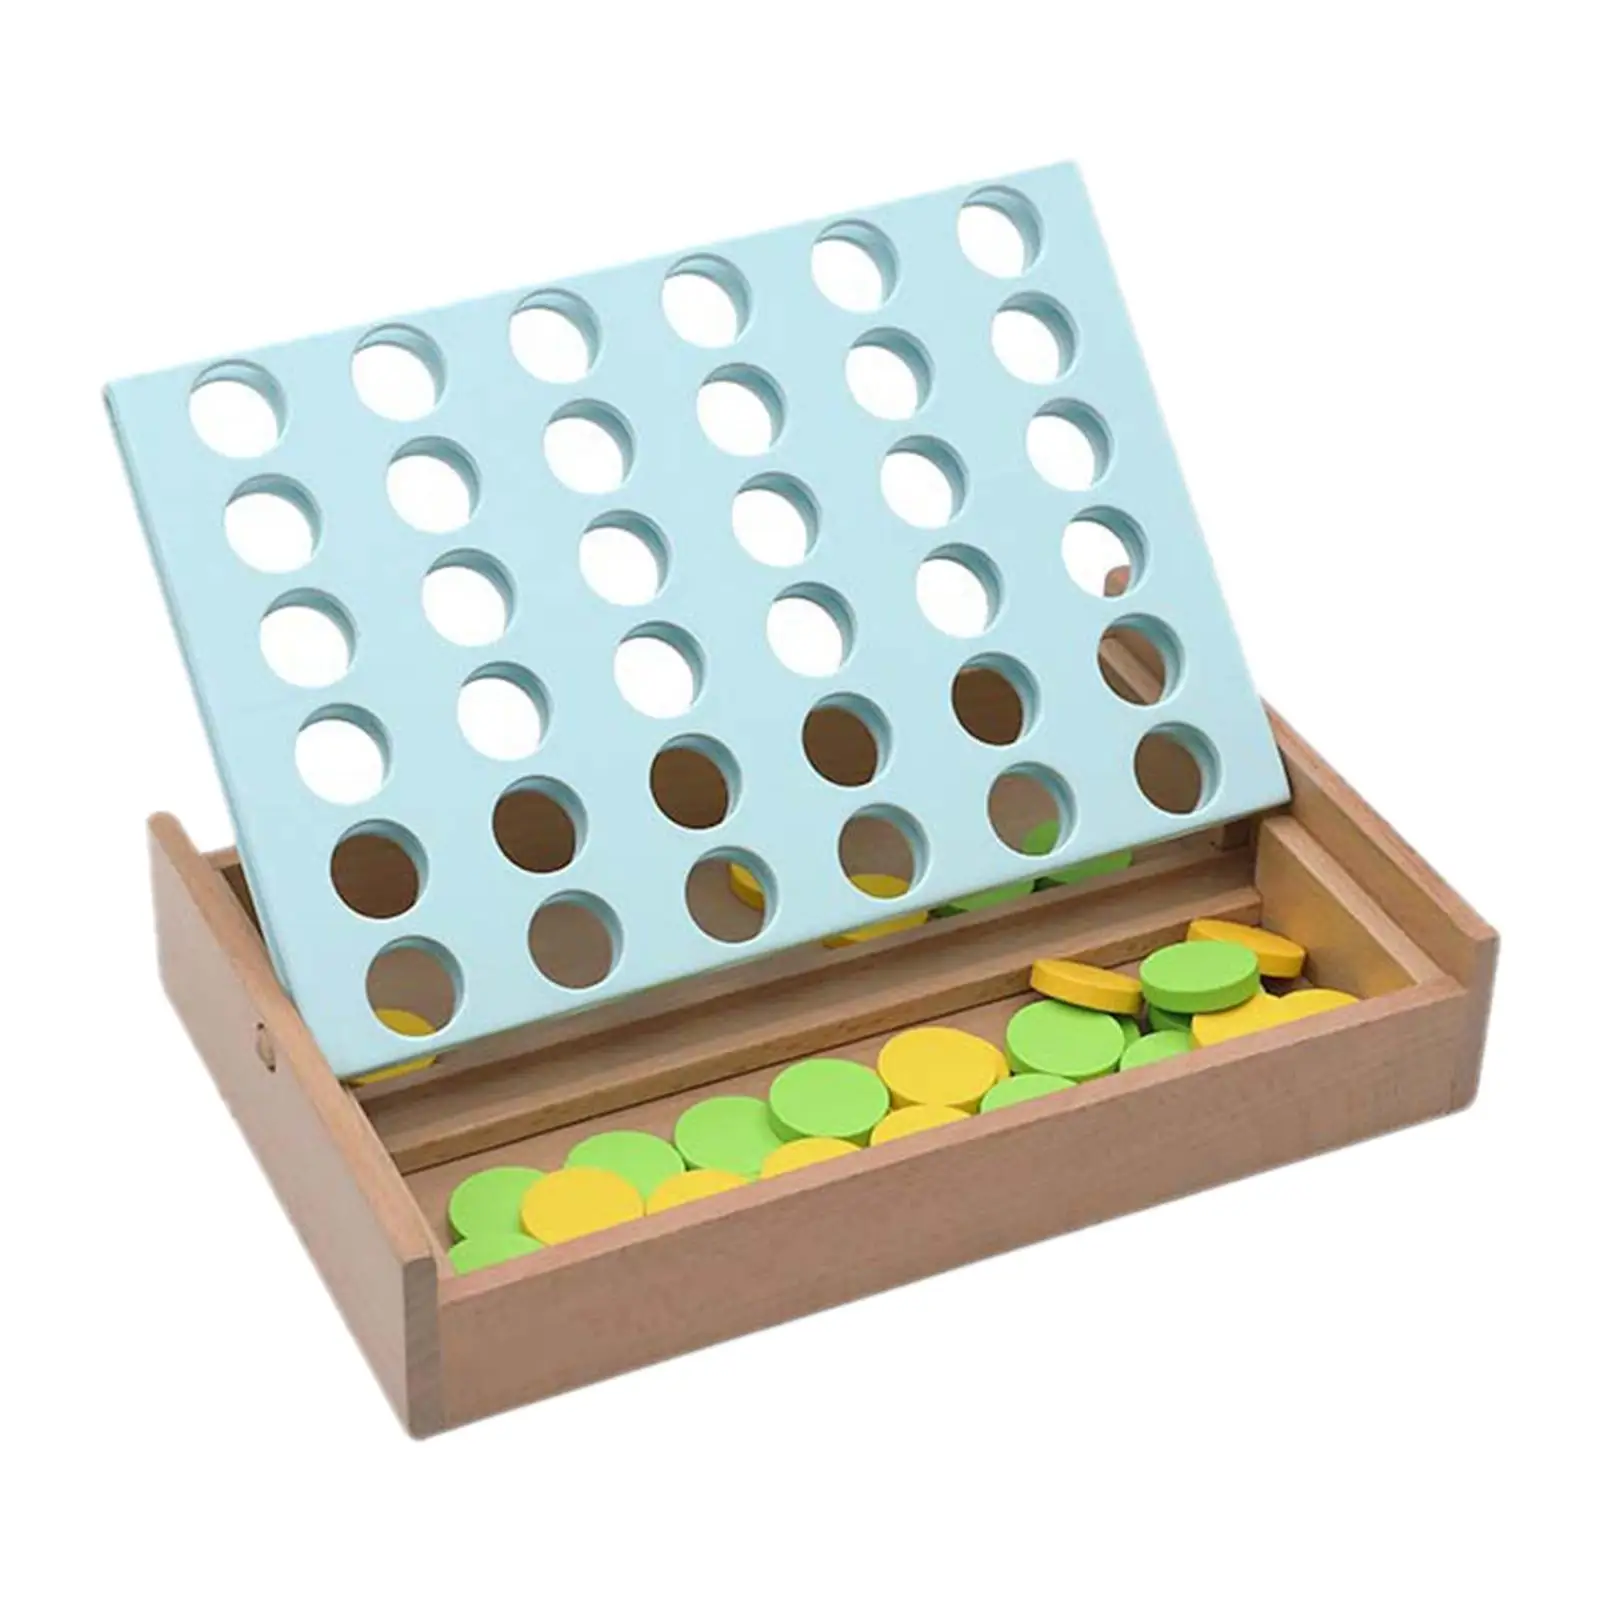 4 in A Row Wooden Board Game Classic Strategy Game Wooden Connect Game for Camping Boys Girls Kids Picnic 3 Years Old